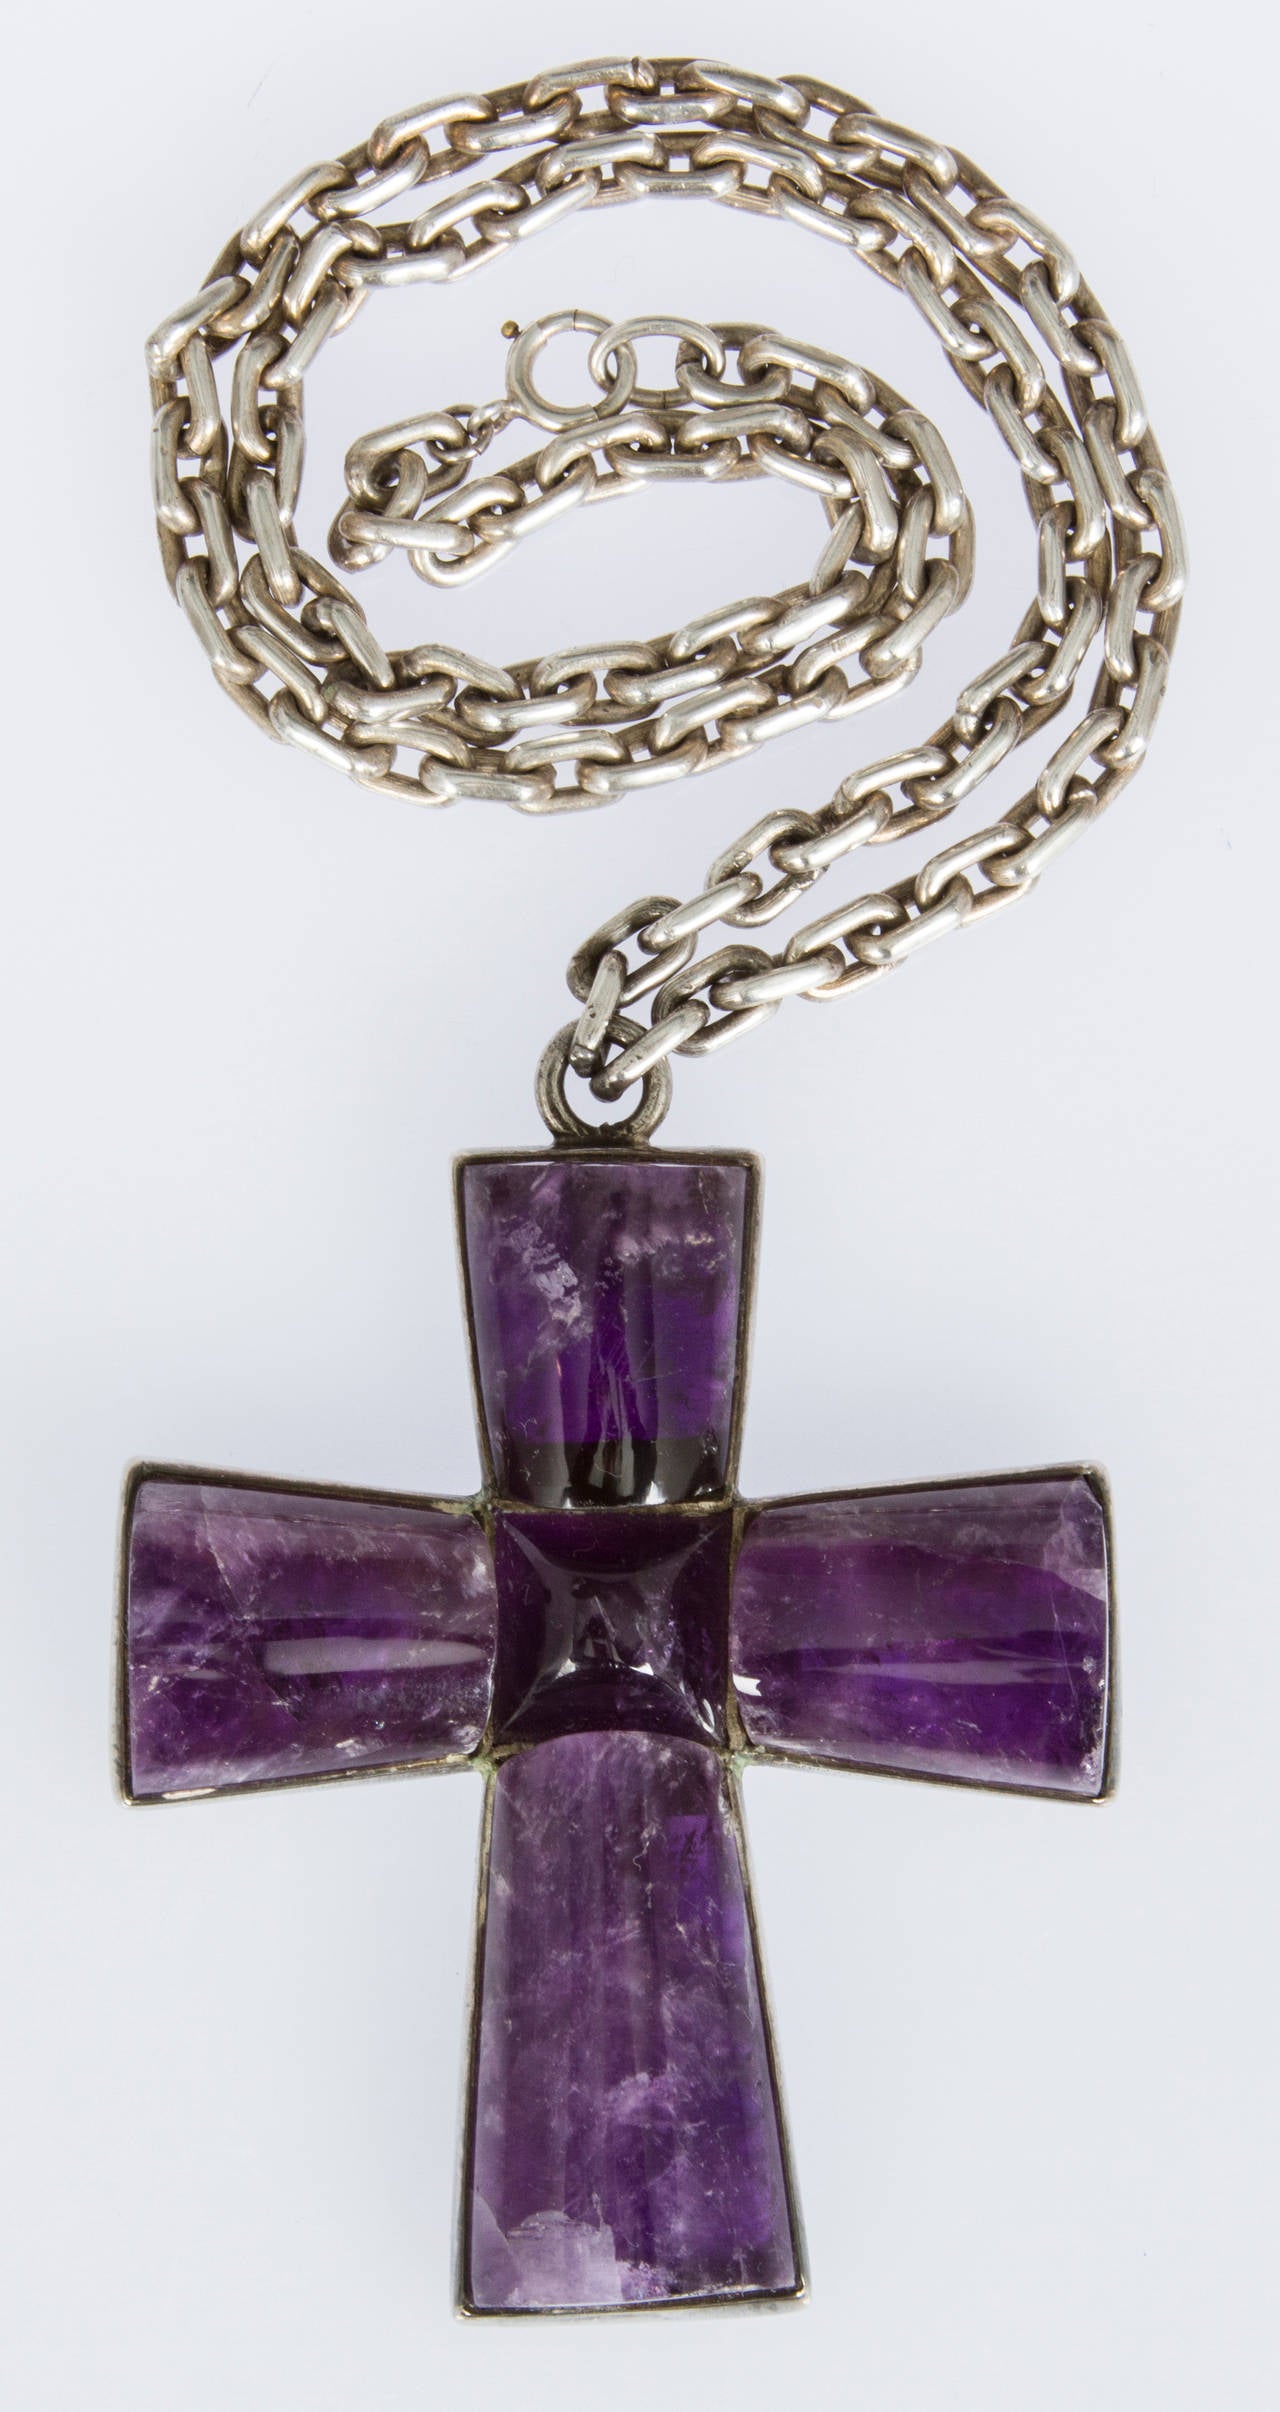 This is a great looking Spratling sterling chain link necklace boasting a  large amethyst cross.

The cross measures 3.